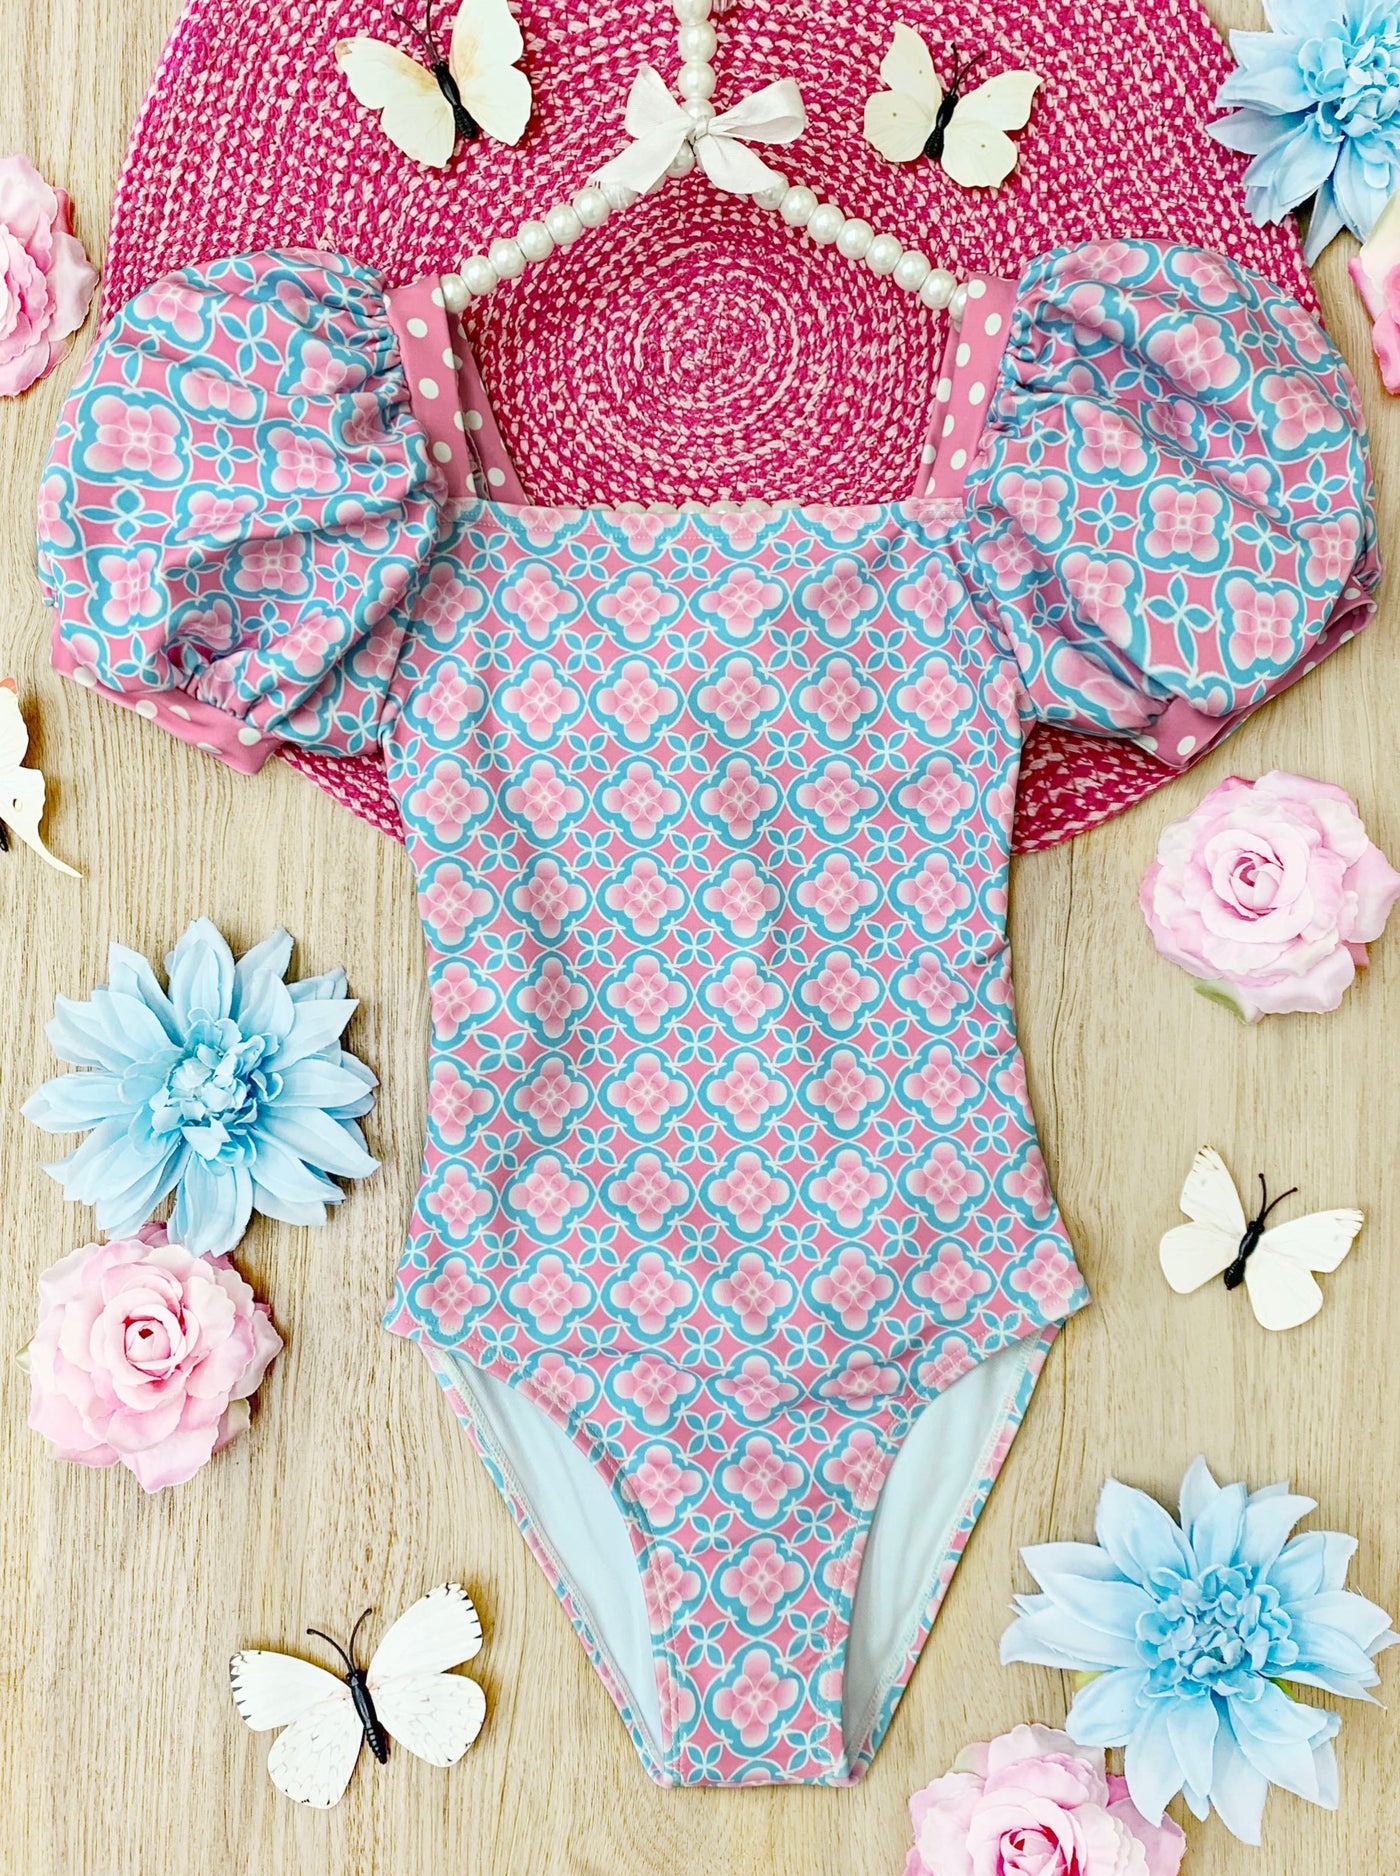 Made For Sunny Days Puff Sleeve One Piece Swimsuit - Mia Belle Girls